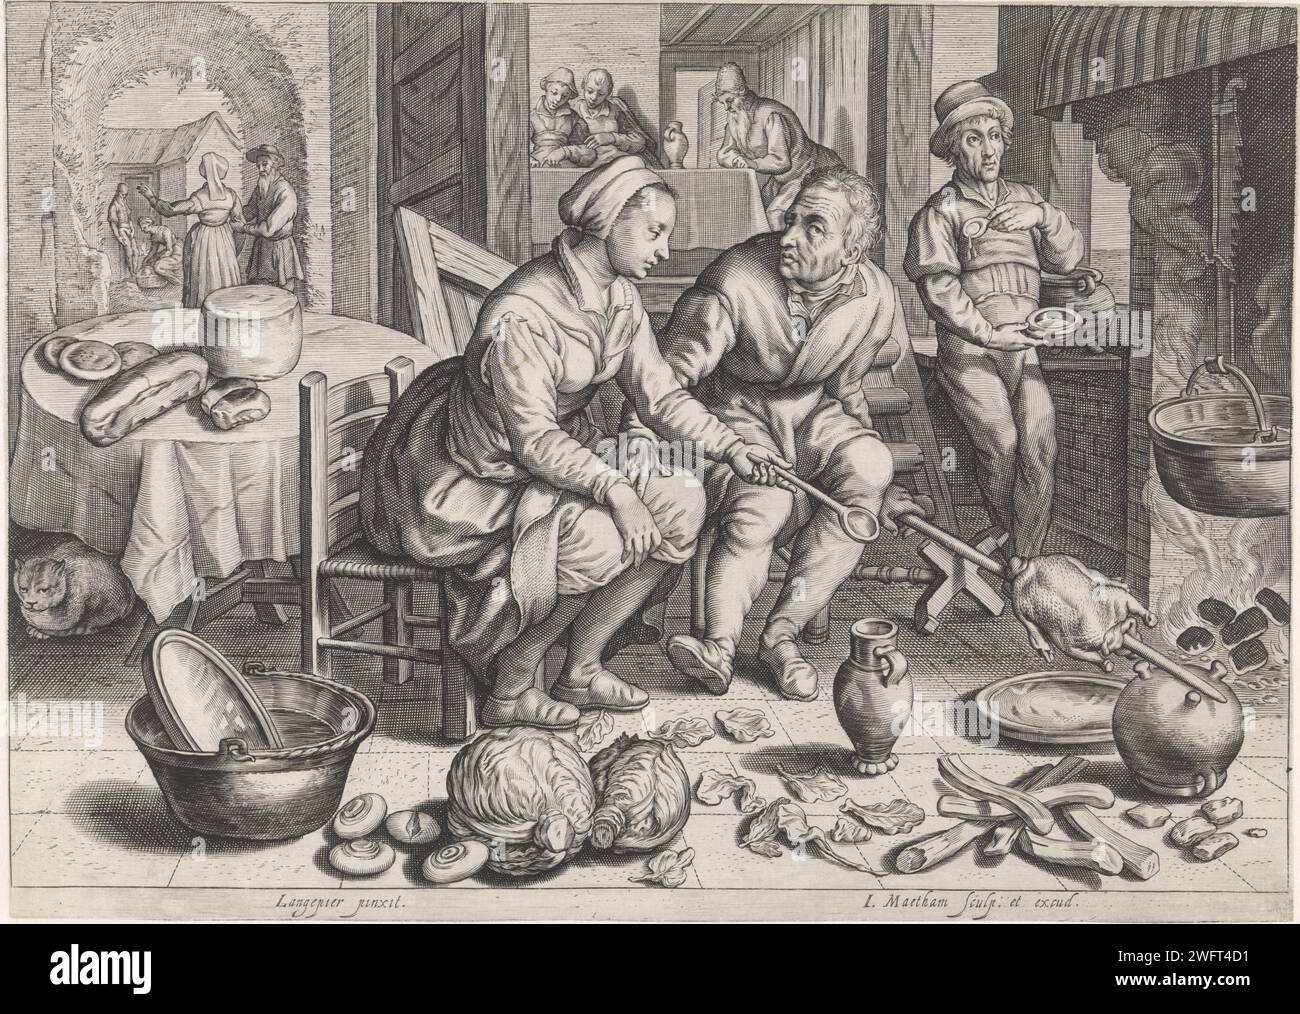 Kitchen piece with chicken on the spit, Jacob Matham, after Pieter Aertsen, 1603 print A pair roasts a chicken in a kitchen. The man holds the spit but also has a hand on the woman's leg. On the left, a man spilled soup from his spoon. In the foreground mushrooms and vegetables. Haarlem paper engraving kitchen-interior with foodstuffs in foreground (Dutch: 'keukenstuk'). grill, gridiron  cooking food Stock Photo